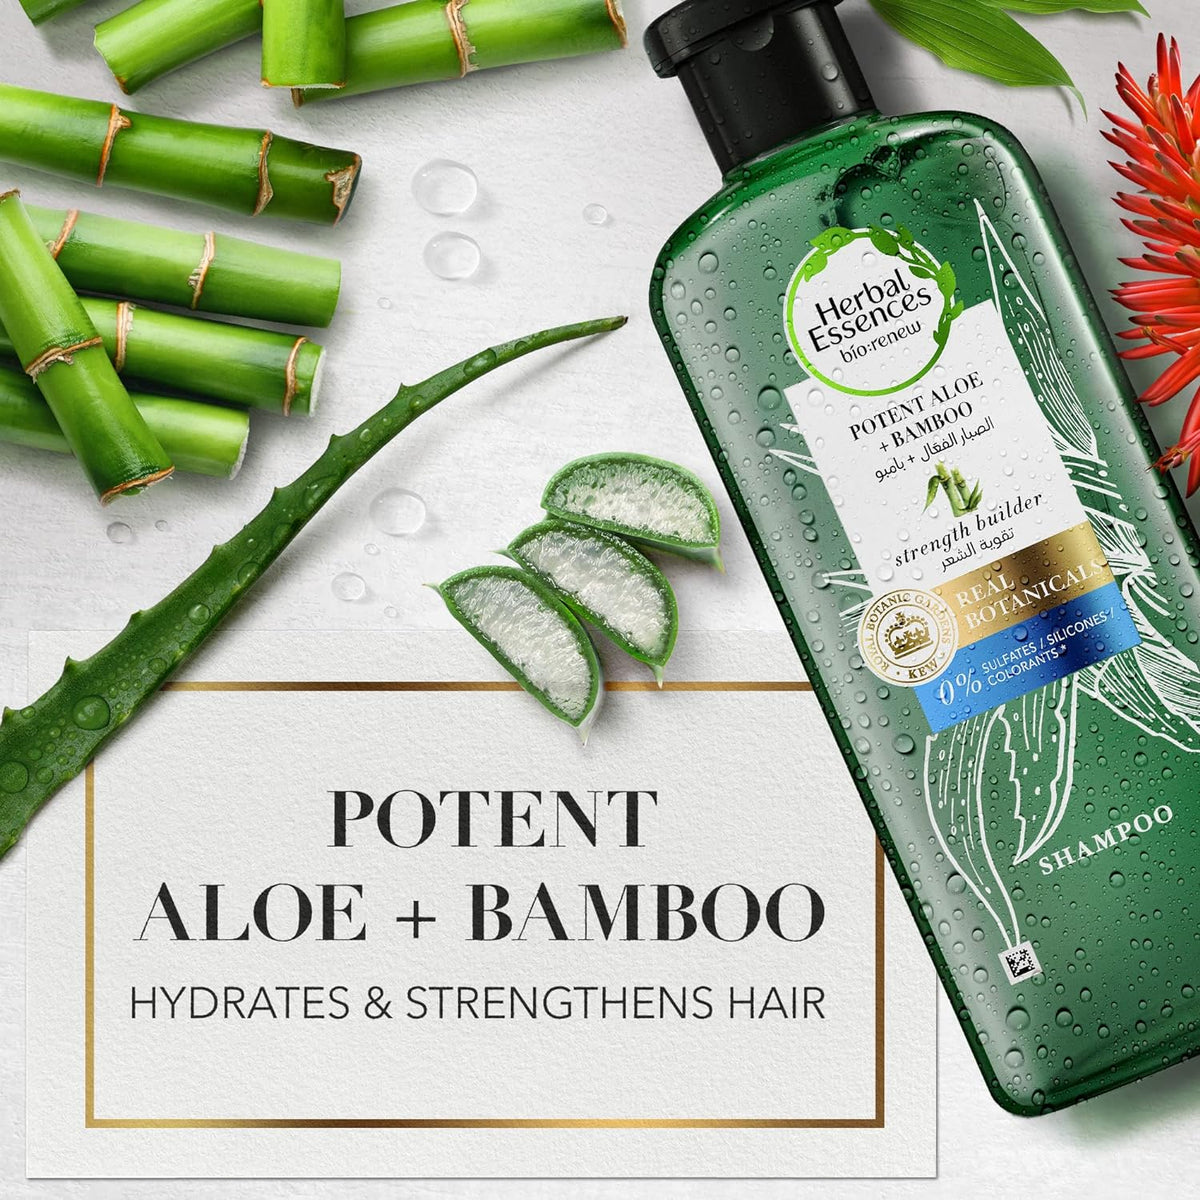 Herbal Essences Hair Strengthening Sulfate Free Potent Aloe Vera With Bamboo Natural Shampoo For Dry Hair 400ML